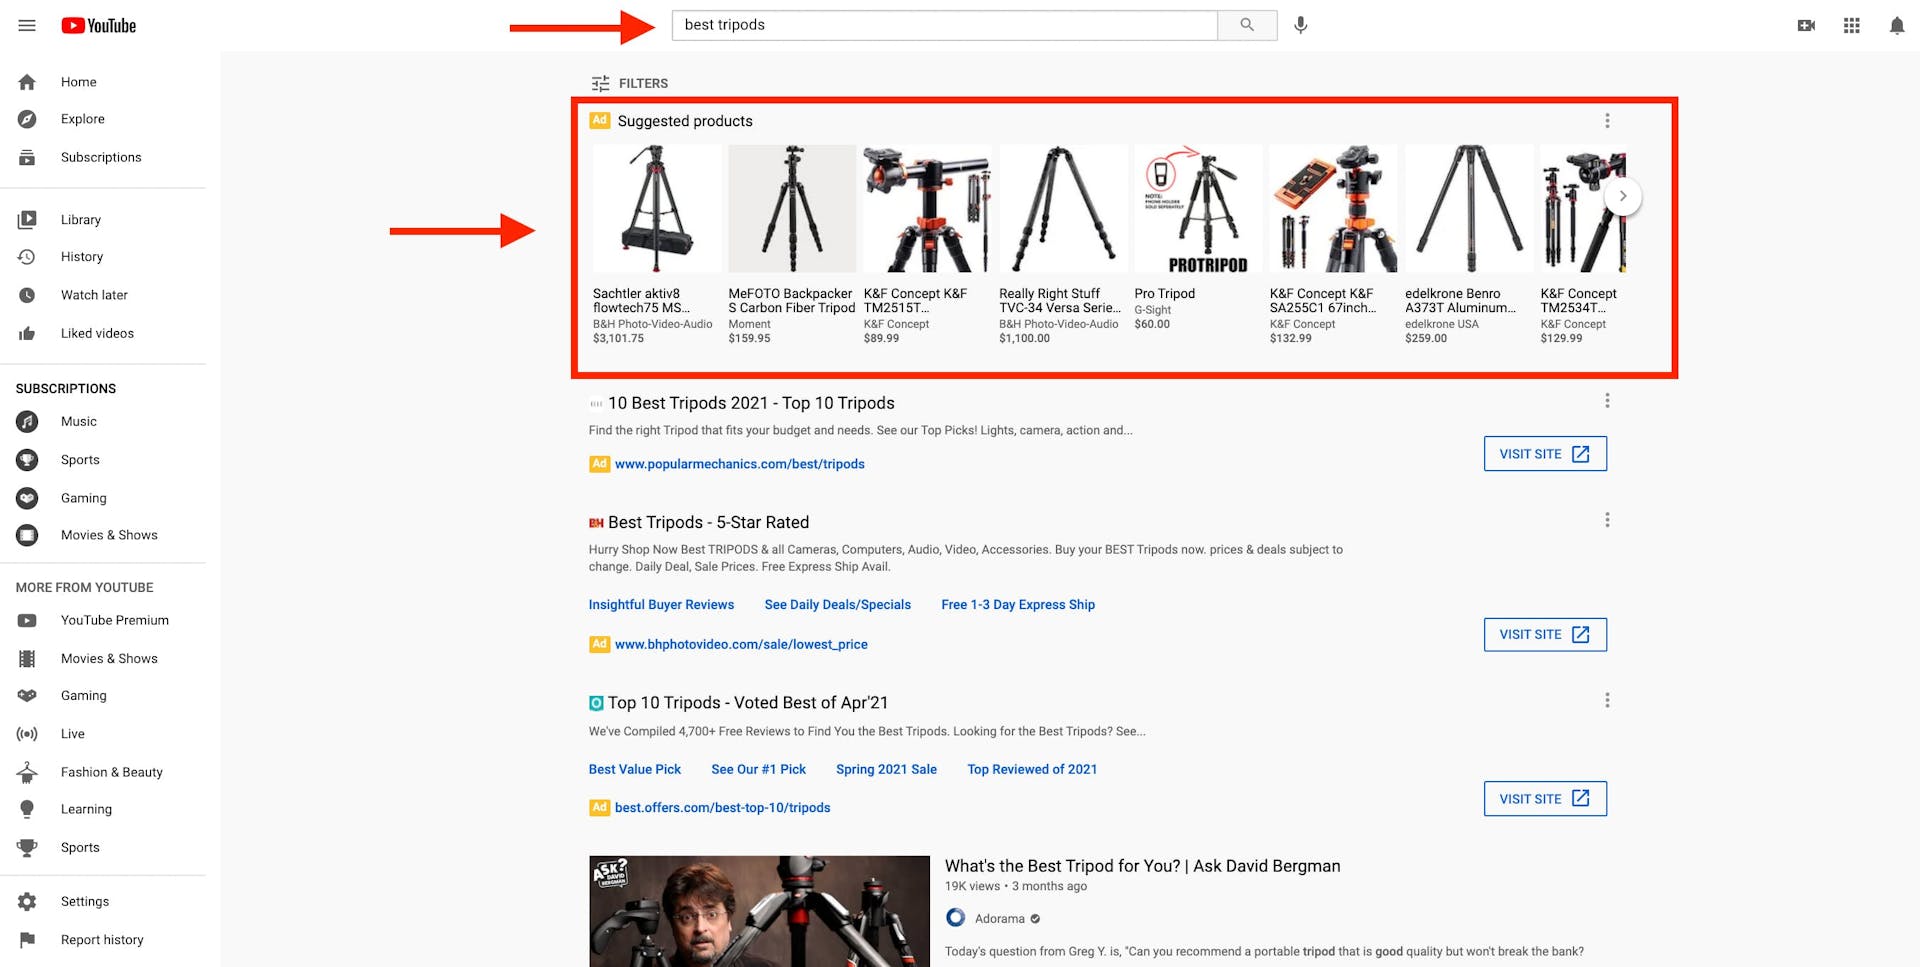 Product image ad results for a purchase focused keyword on YouTube